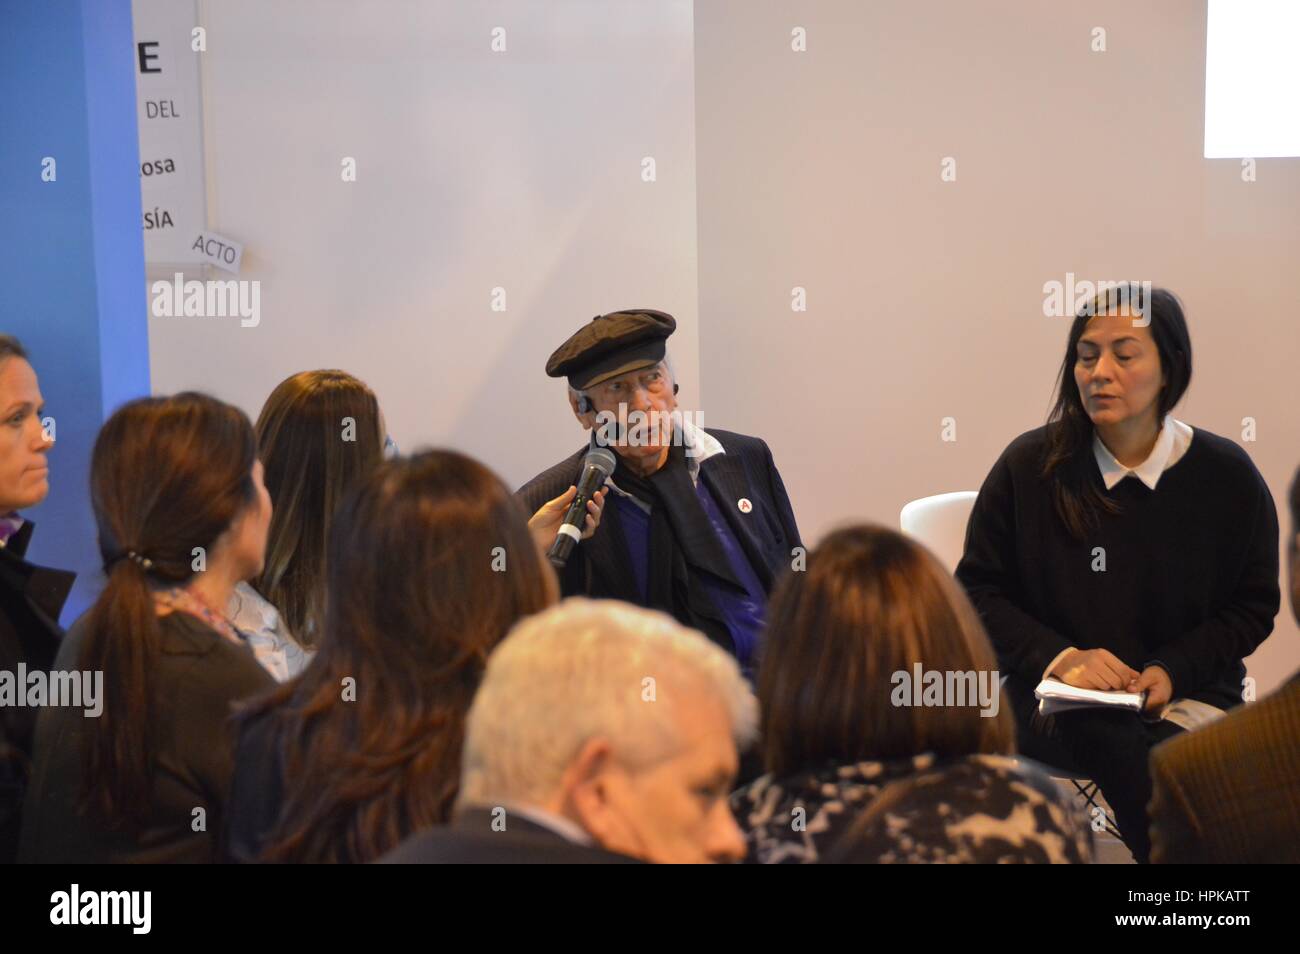 Madrid, Spain. 22nd February, 2017. Lecture by the painter and sculptor, Julio Le Parc in ARCO Madrid's international art fair. ARCO, opens its doors to art collectors and the general public. This year, Argentina has a prominent presence as a guest country. Credit: EnriquePSans/Alamy Live News Stock Photo